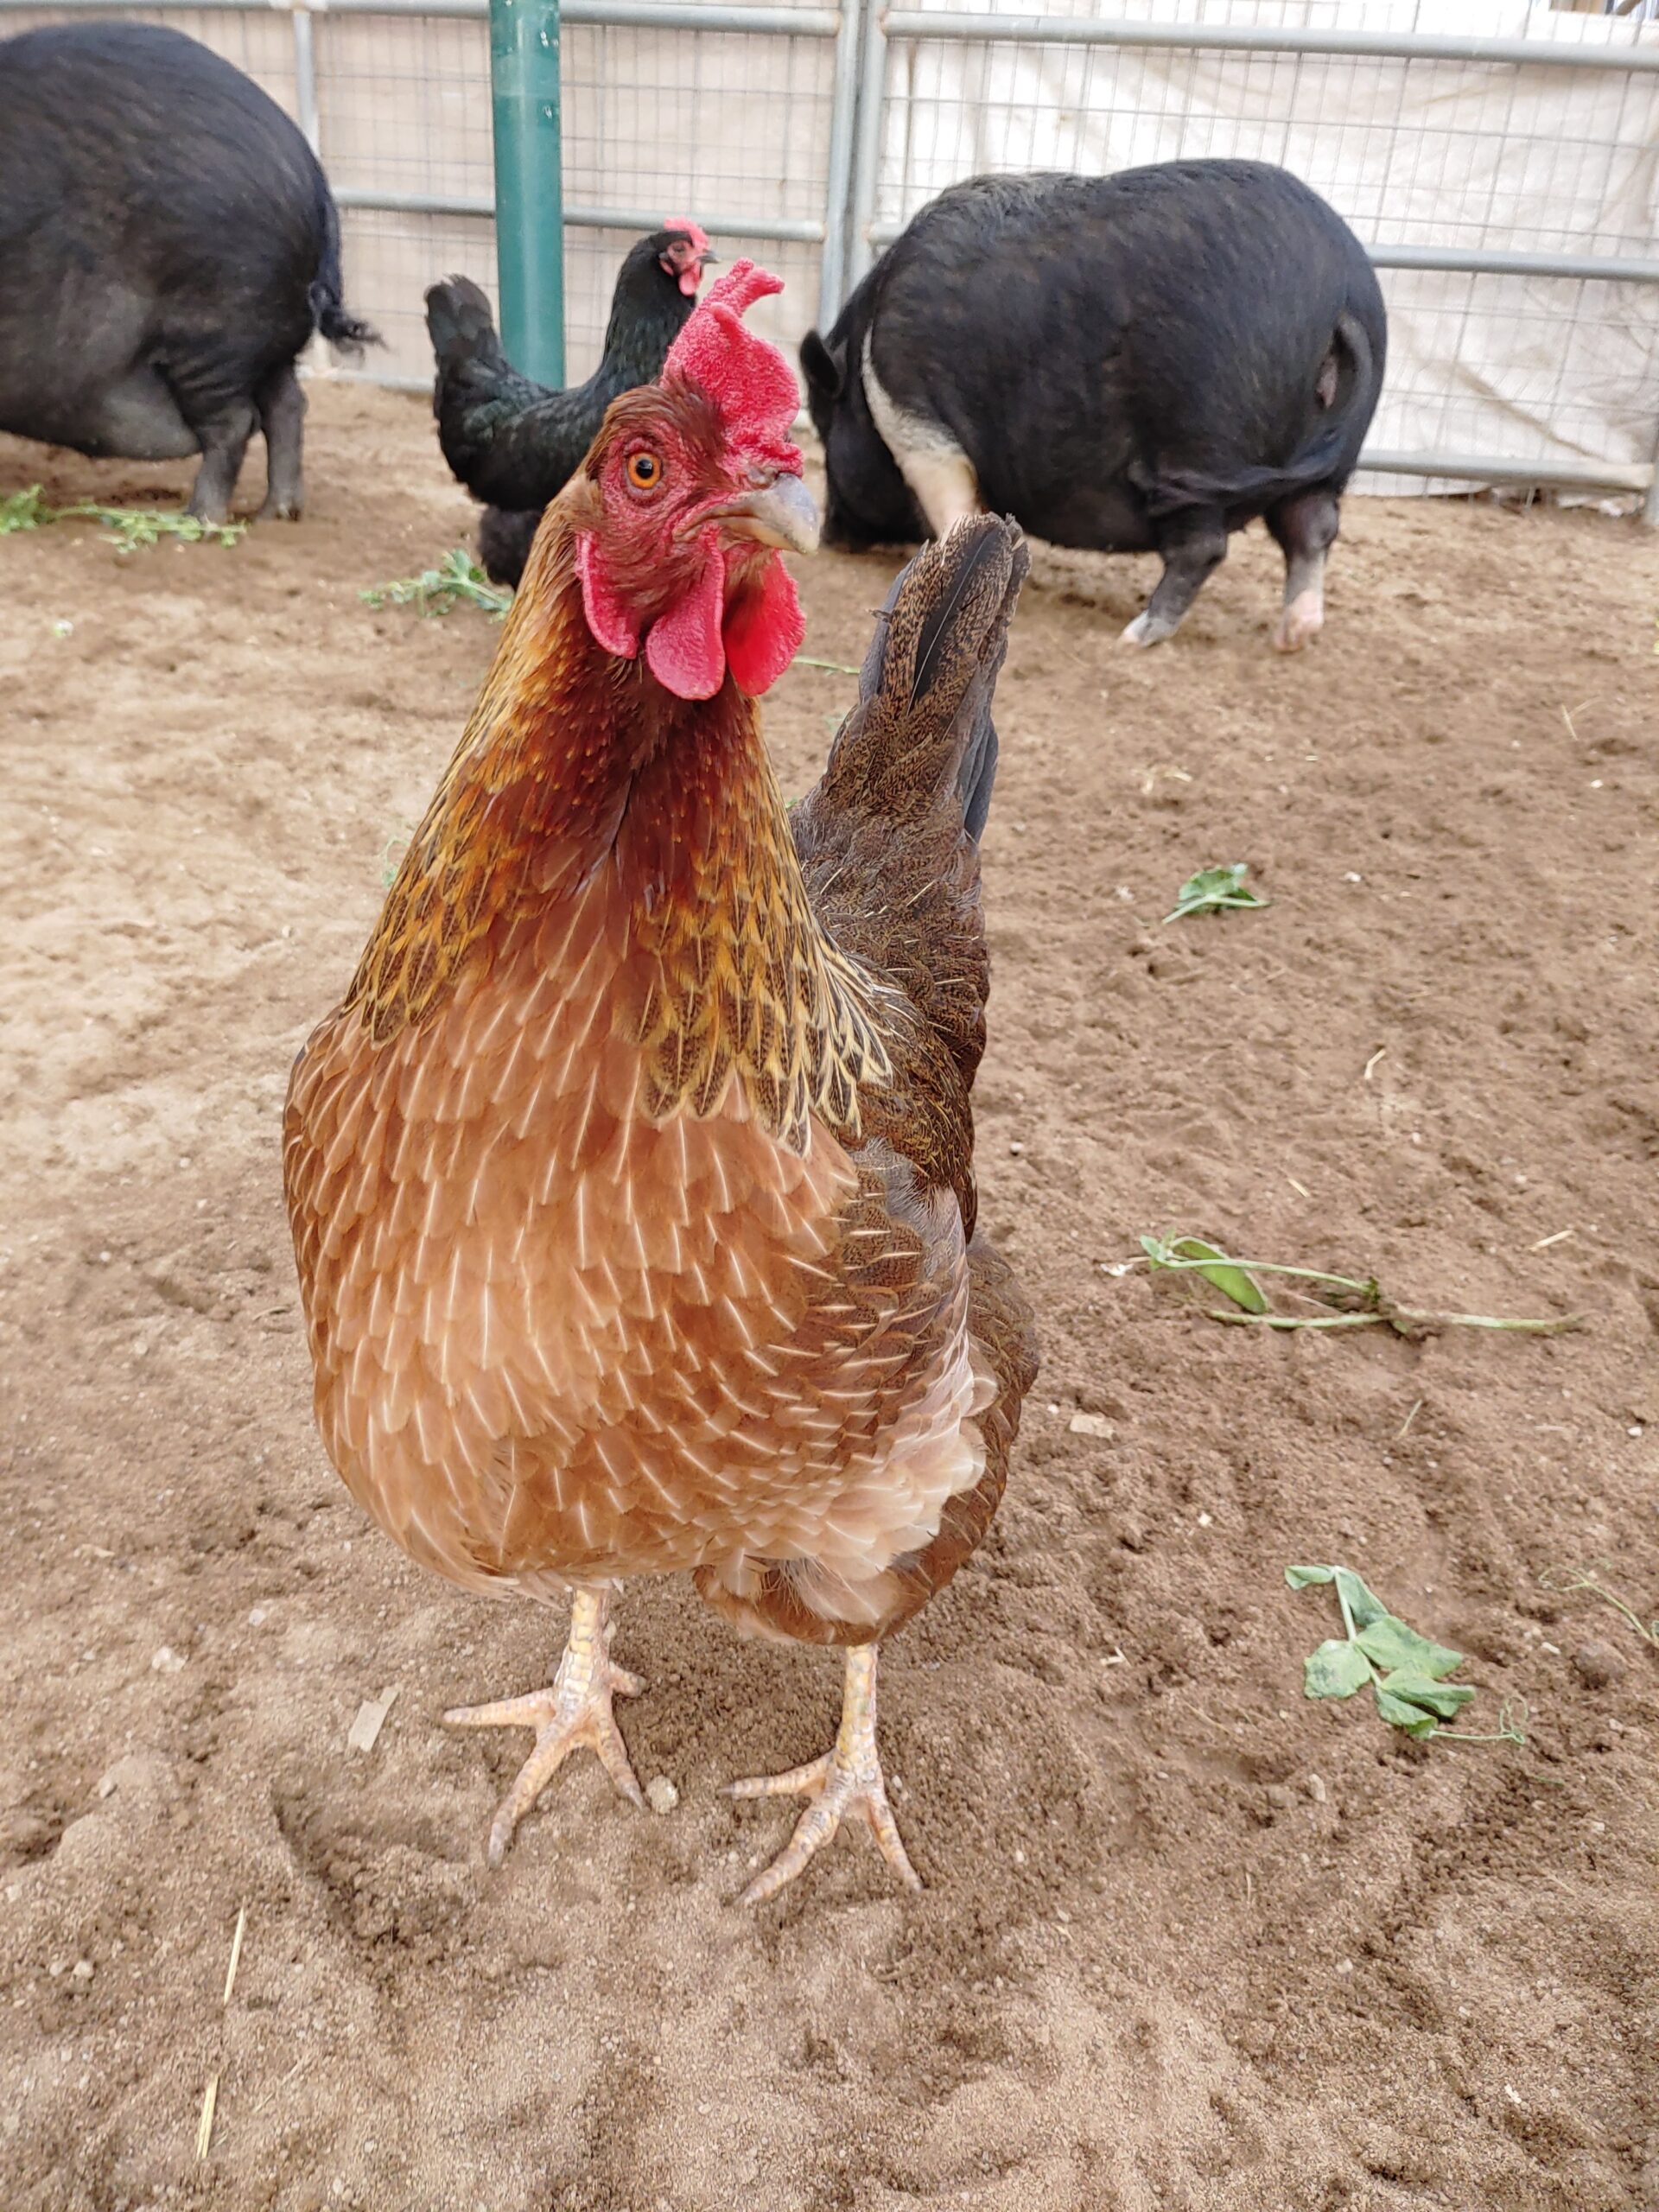 The Hens at Sale Ranch